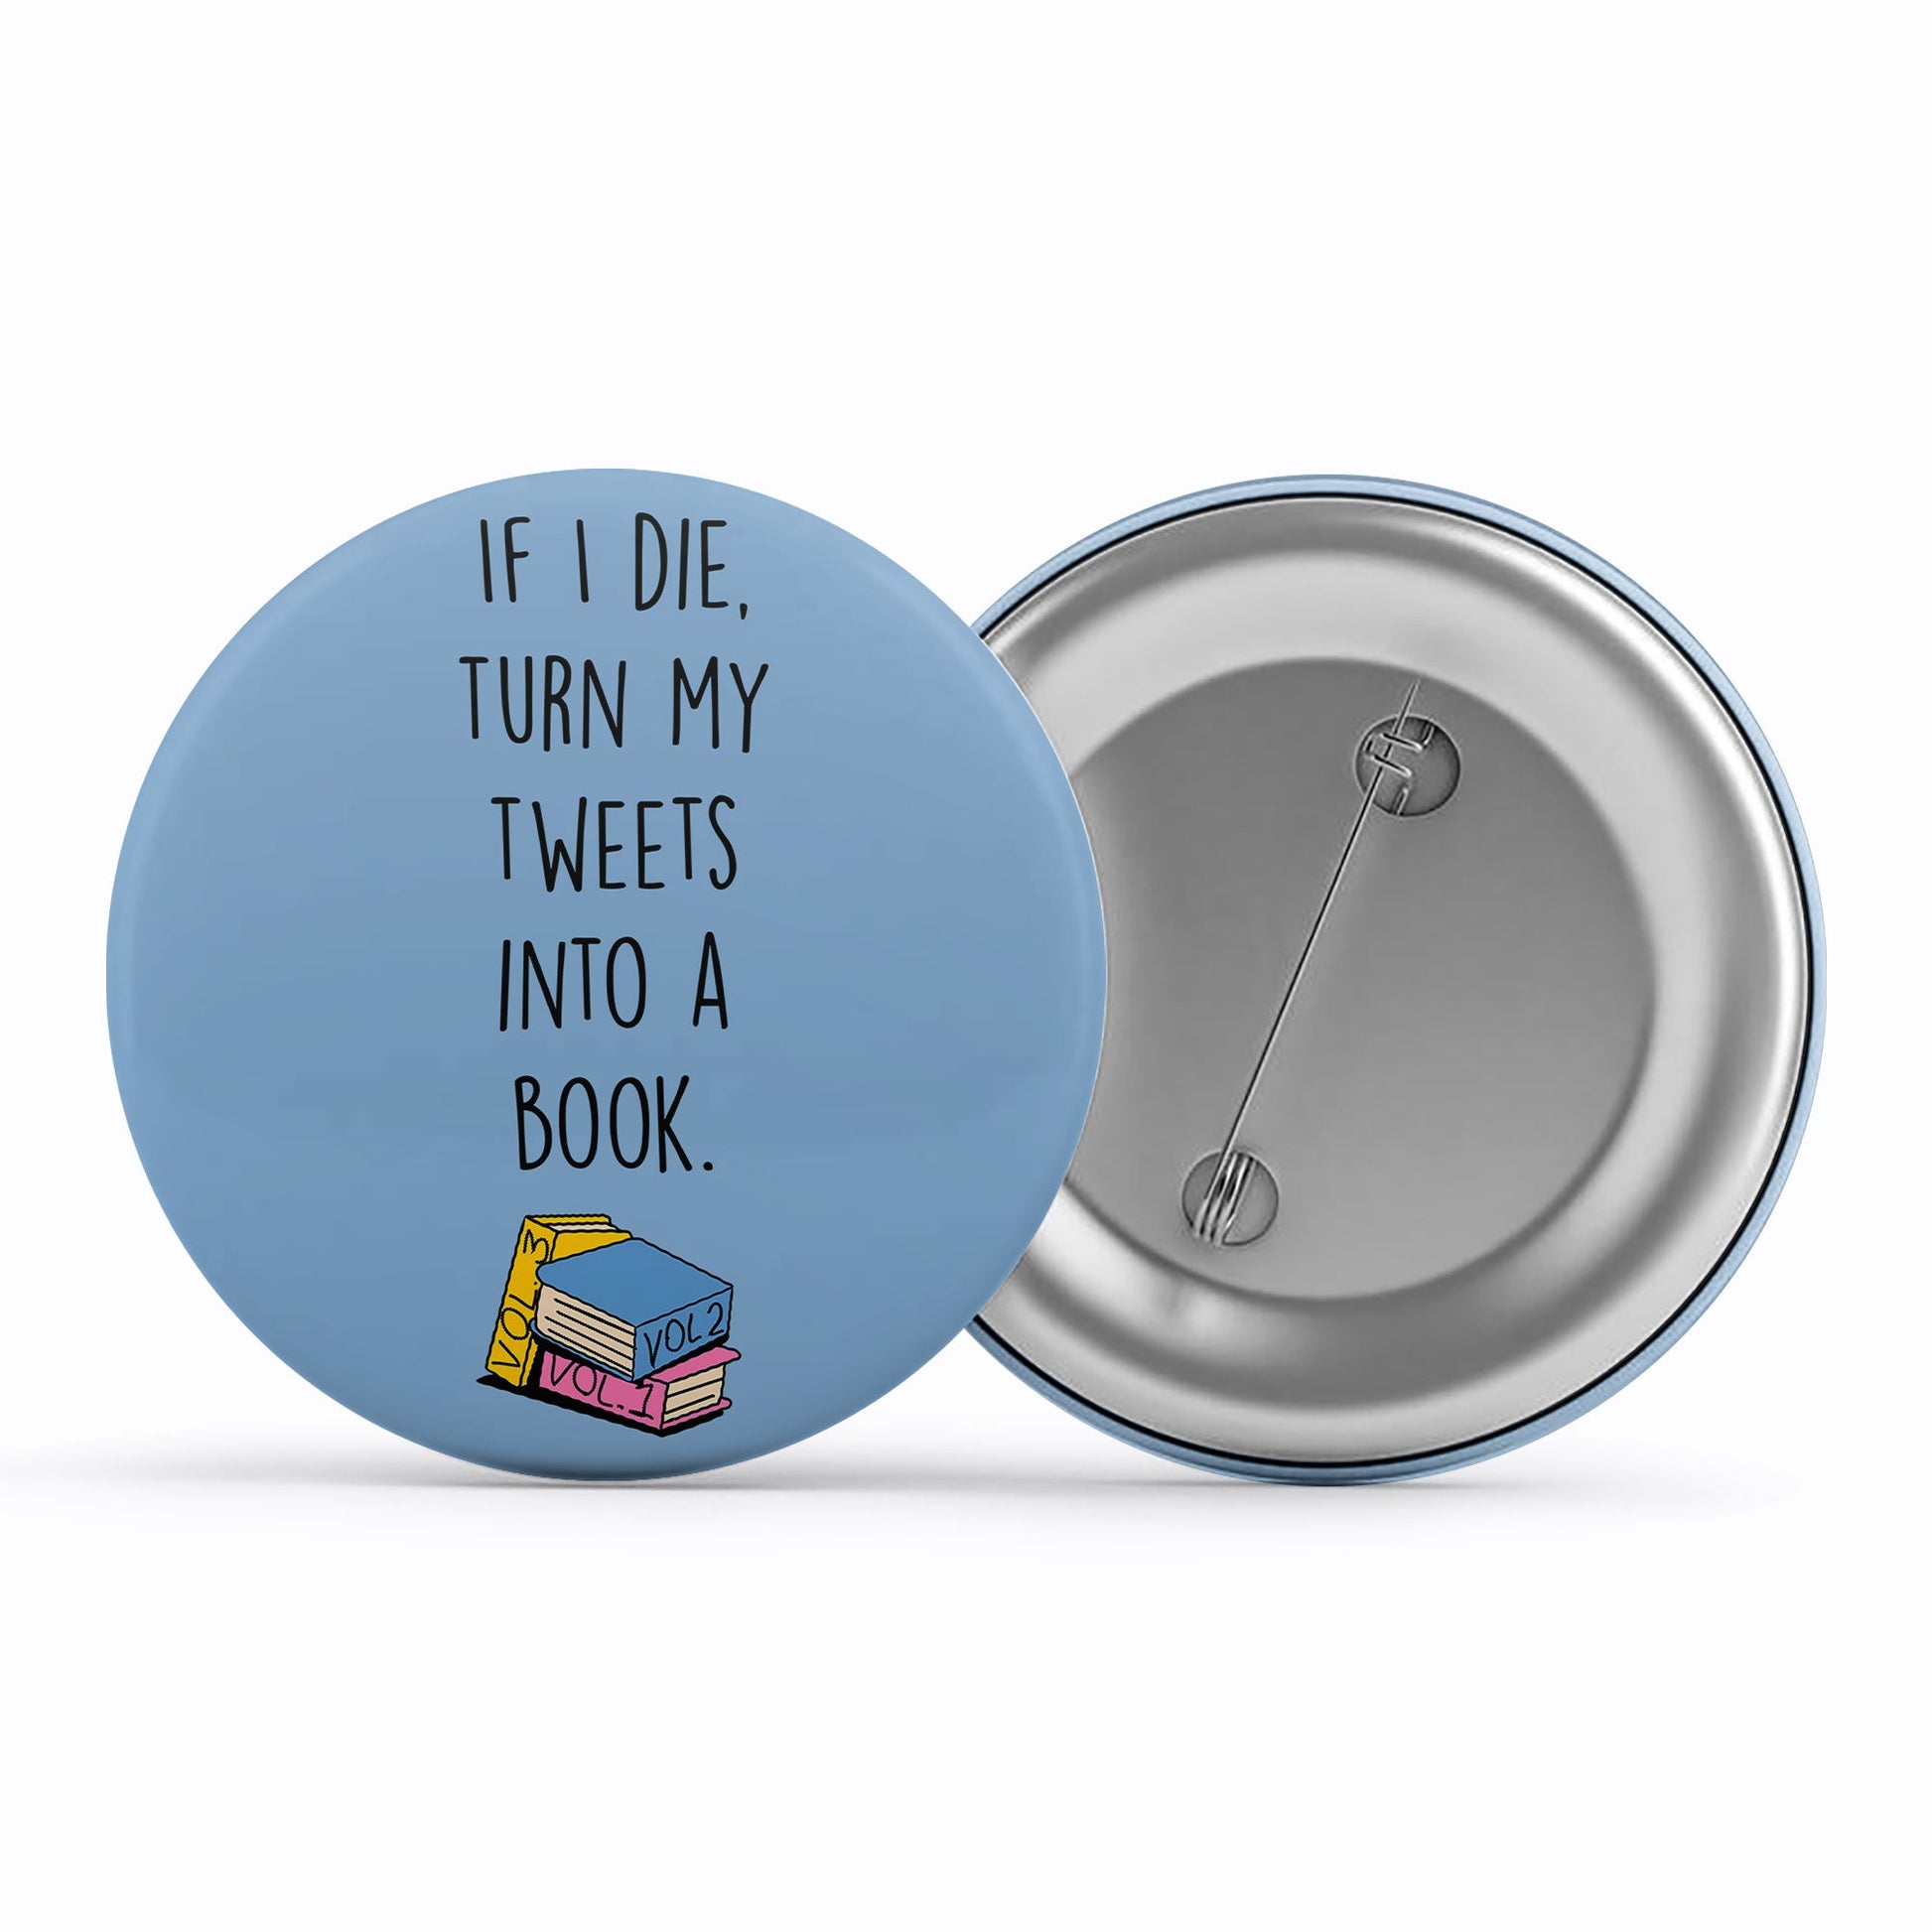 brooklyn nine-nine turn my tweets into books badge pin button tv & movies buy online india the banyan tee tbt men women girls boys unisex  stranger things eleven demogorgon shadow monster dustin quote vector art clothing accessories merchandise